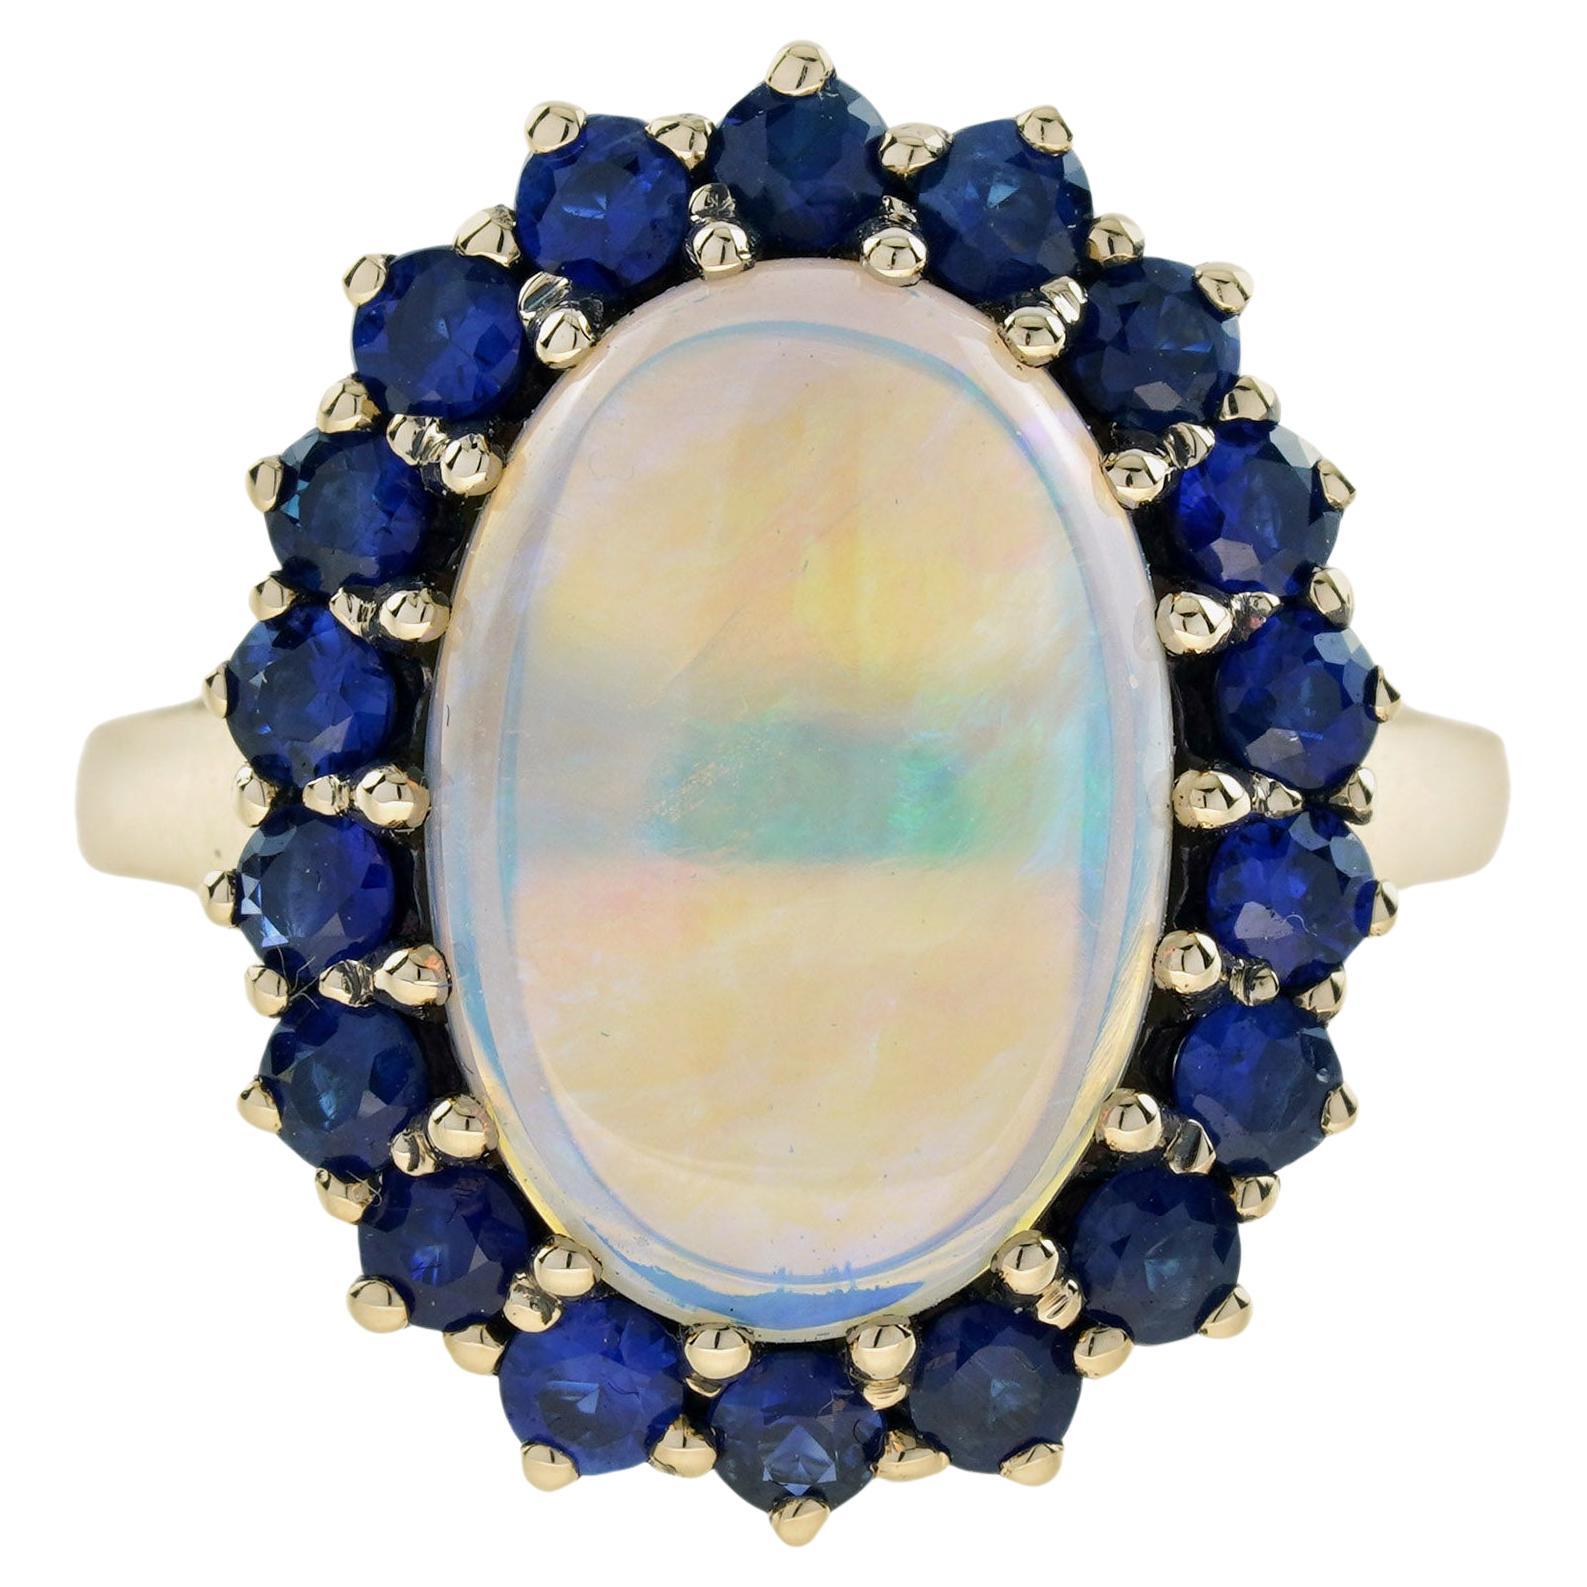 3.43 Ct. Opal with Blue Sapphire Vintage Style Cocktail Ring in 9K Yellow Gold